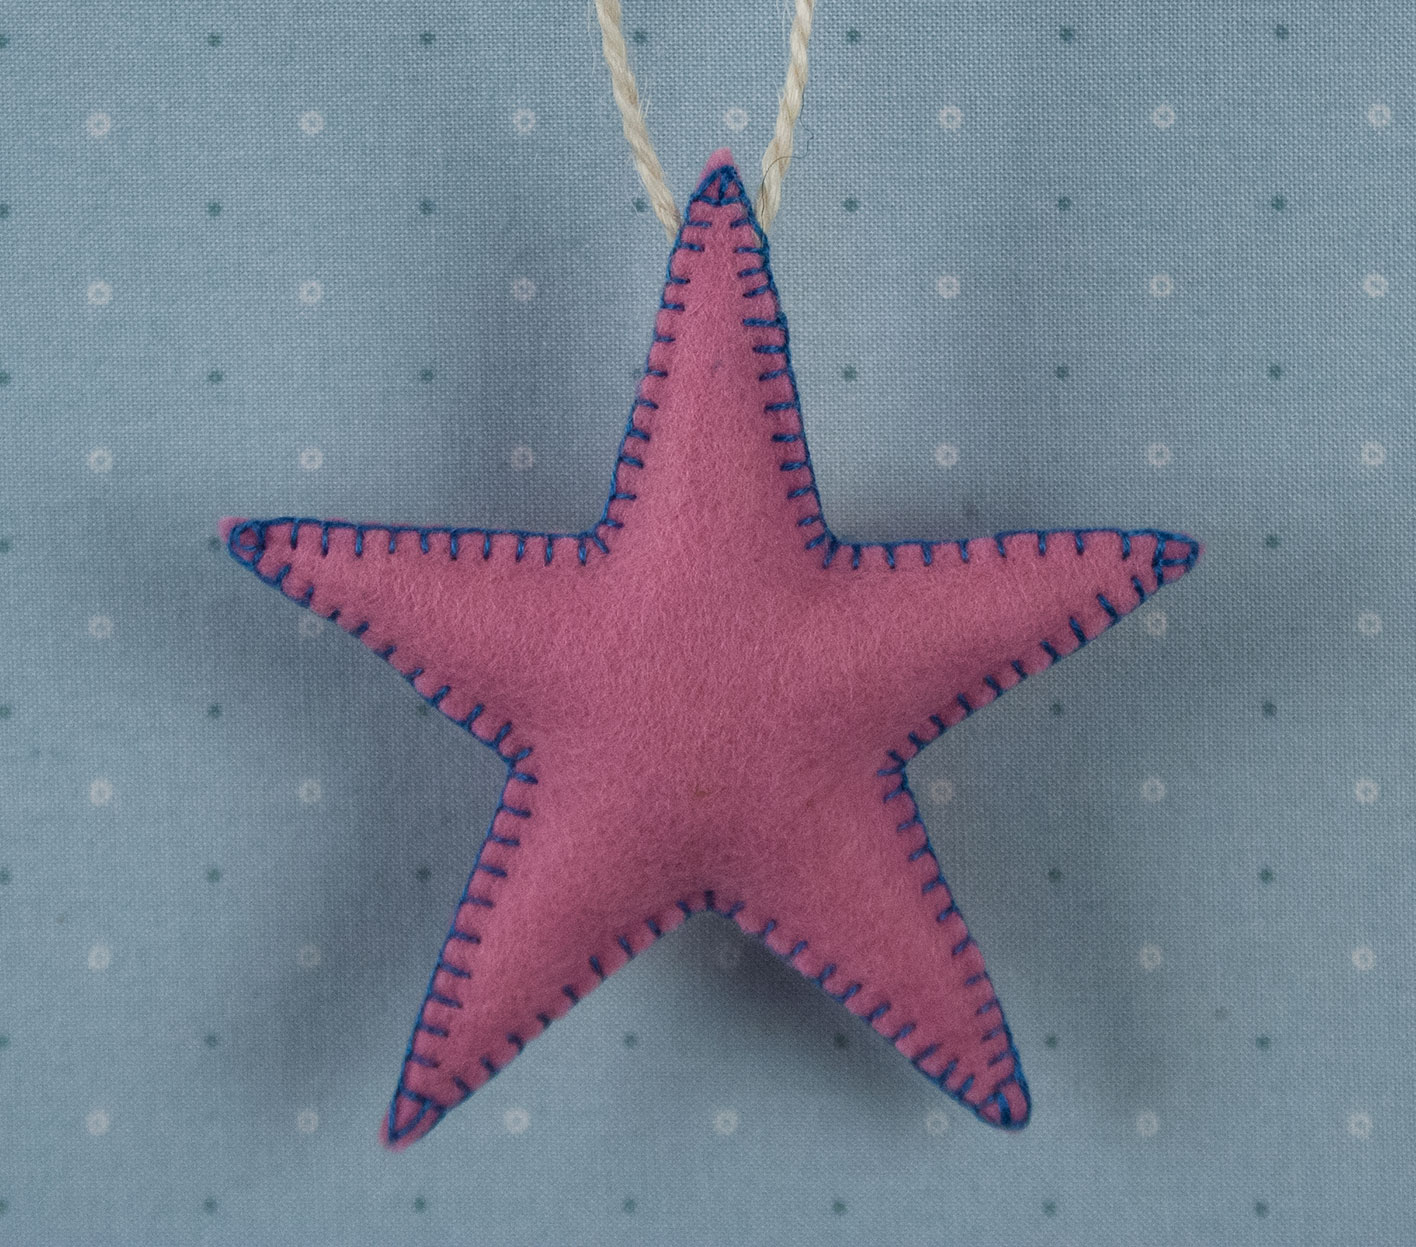 How to Make a Wool Felt Star Ornament - Free Sewing Tutorial